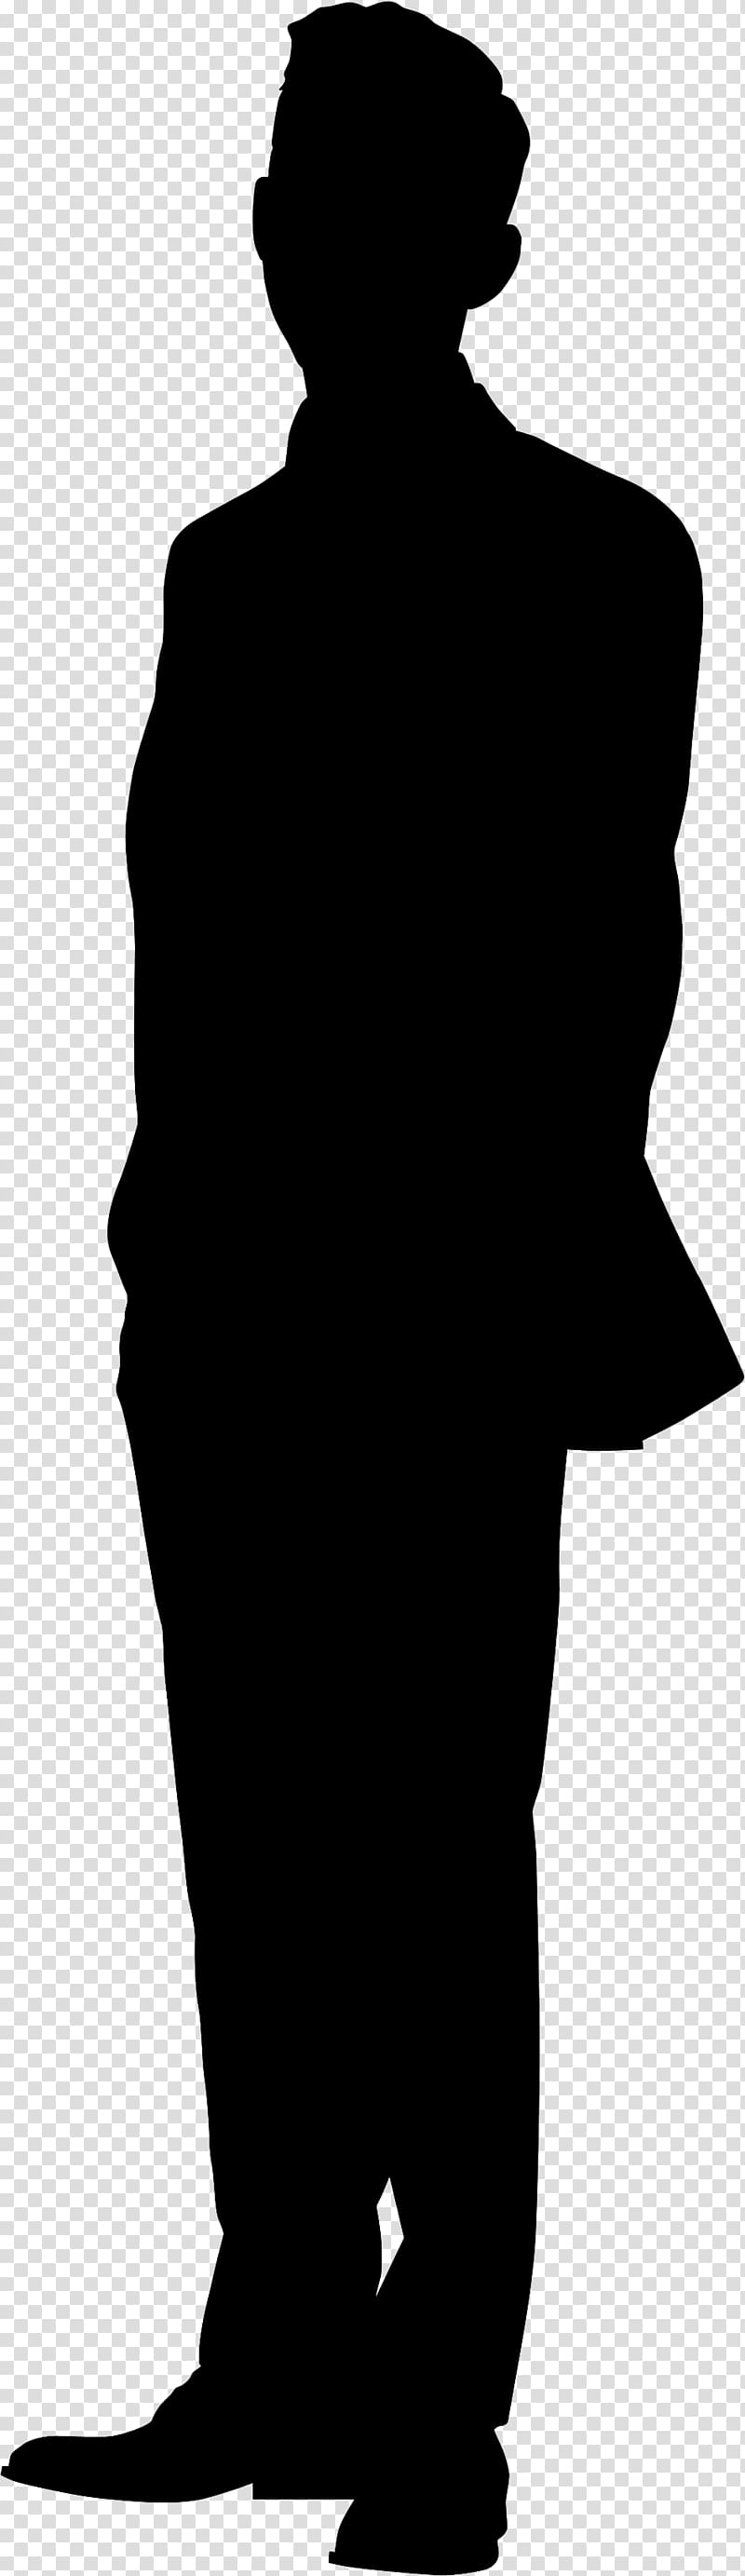 Silhouette Person Playwright, Silhouette transparent background PNG ...